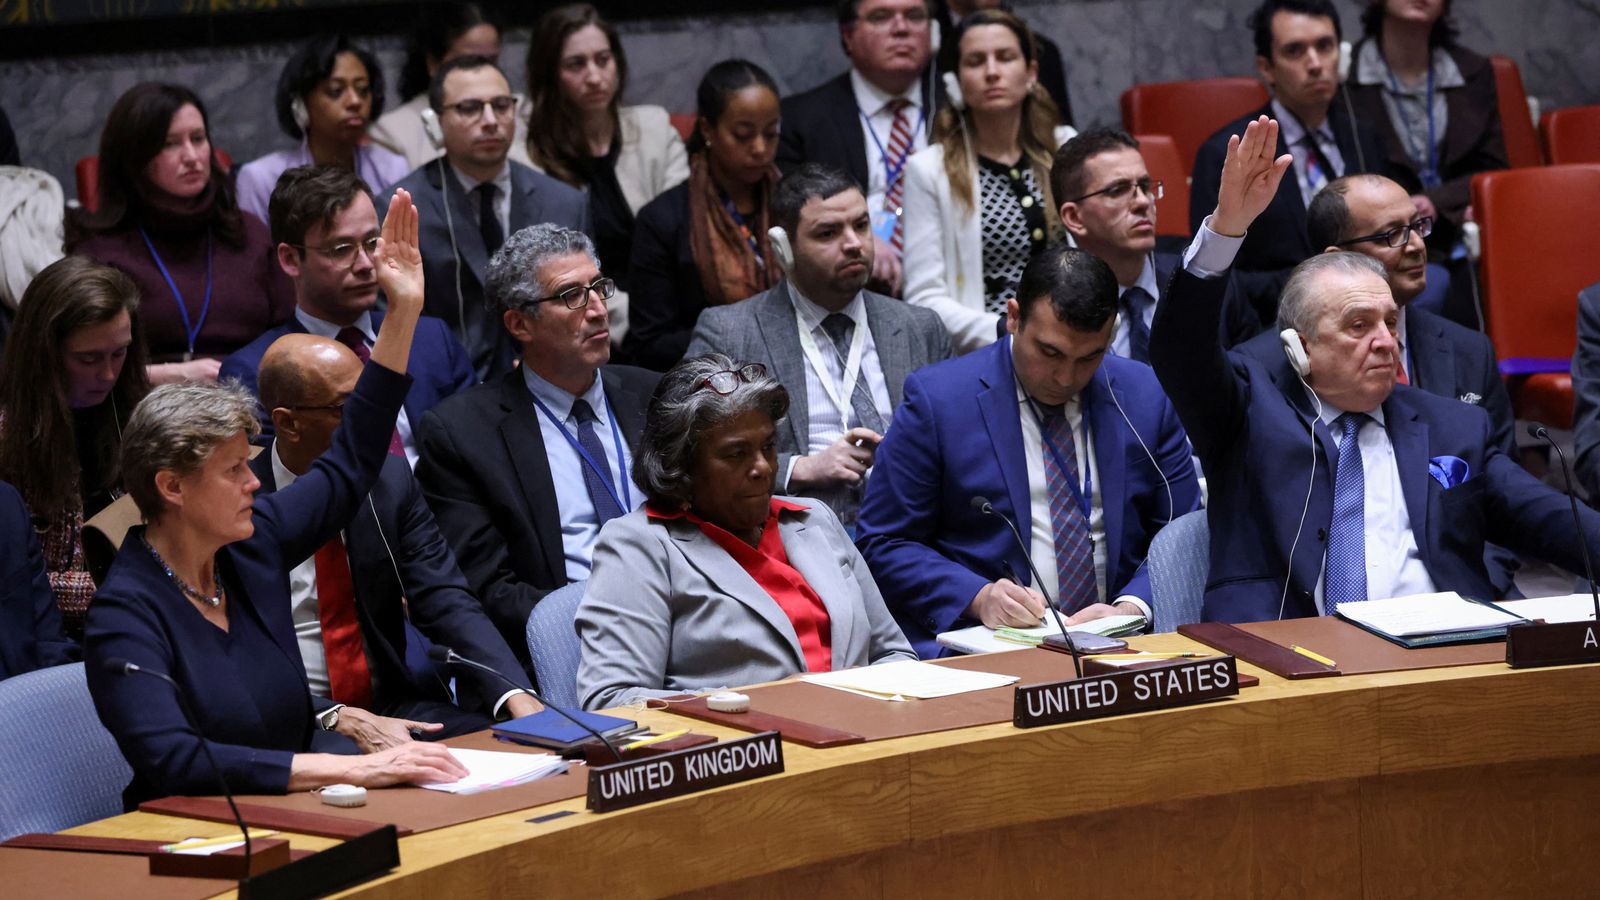 UN Security Council passes resolution demanding Gaza ceasefire - as US abstains